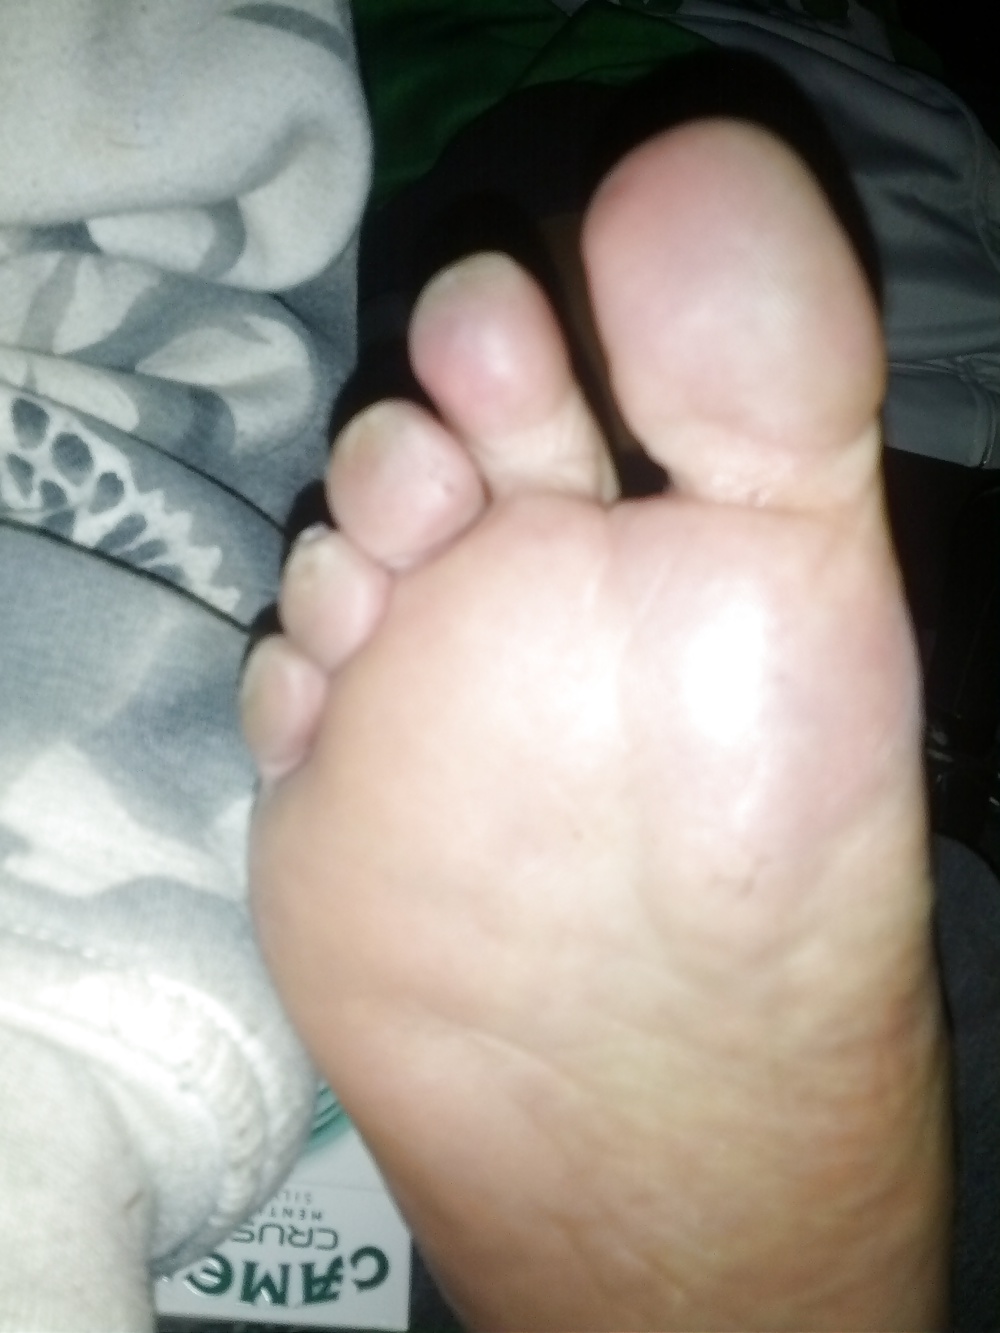 Sex my moms friends feet and tits image